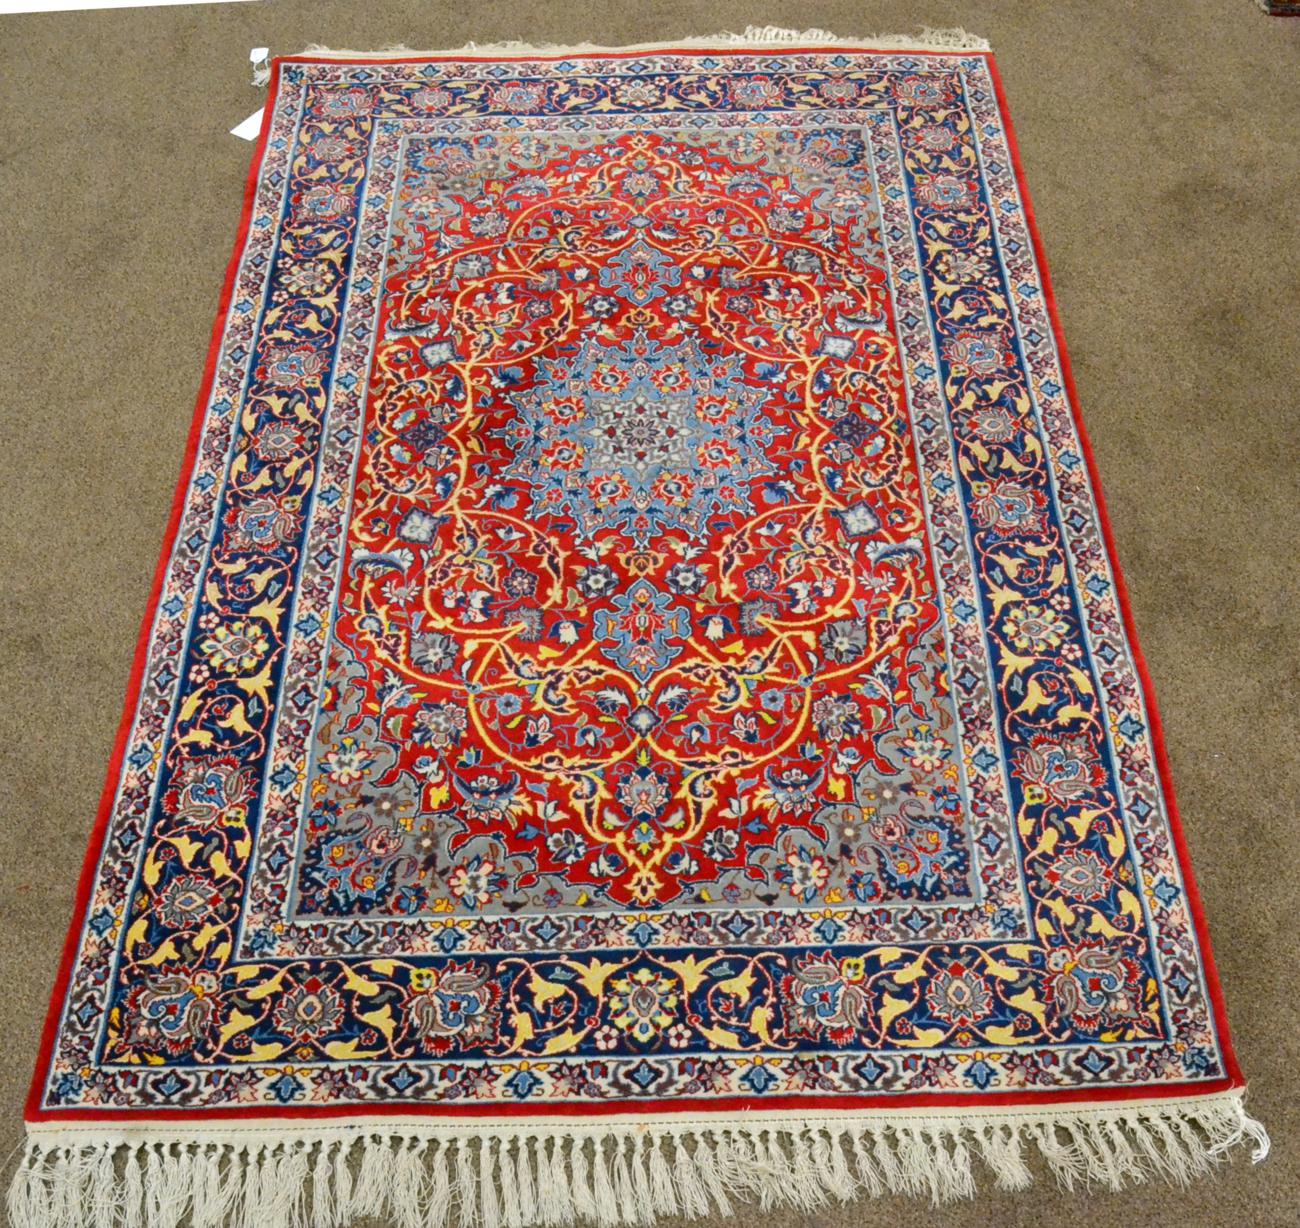 A Finely Knotted Isfahan Rug Central Iran The crimson field of scrolling floral vines around an